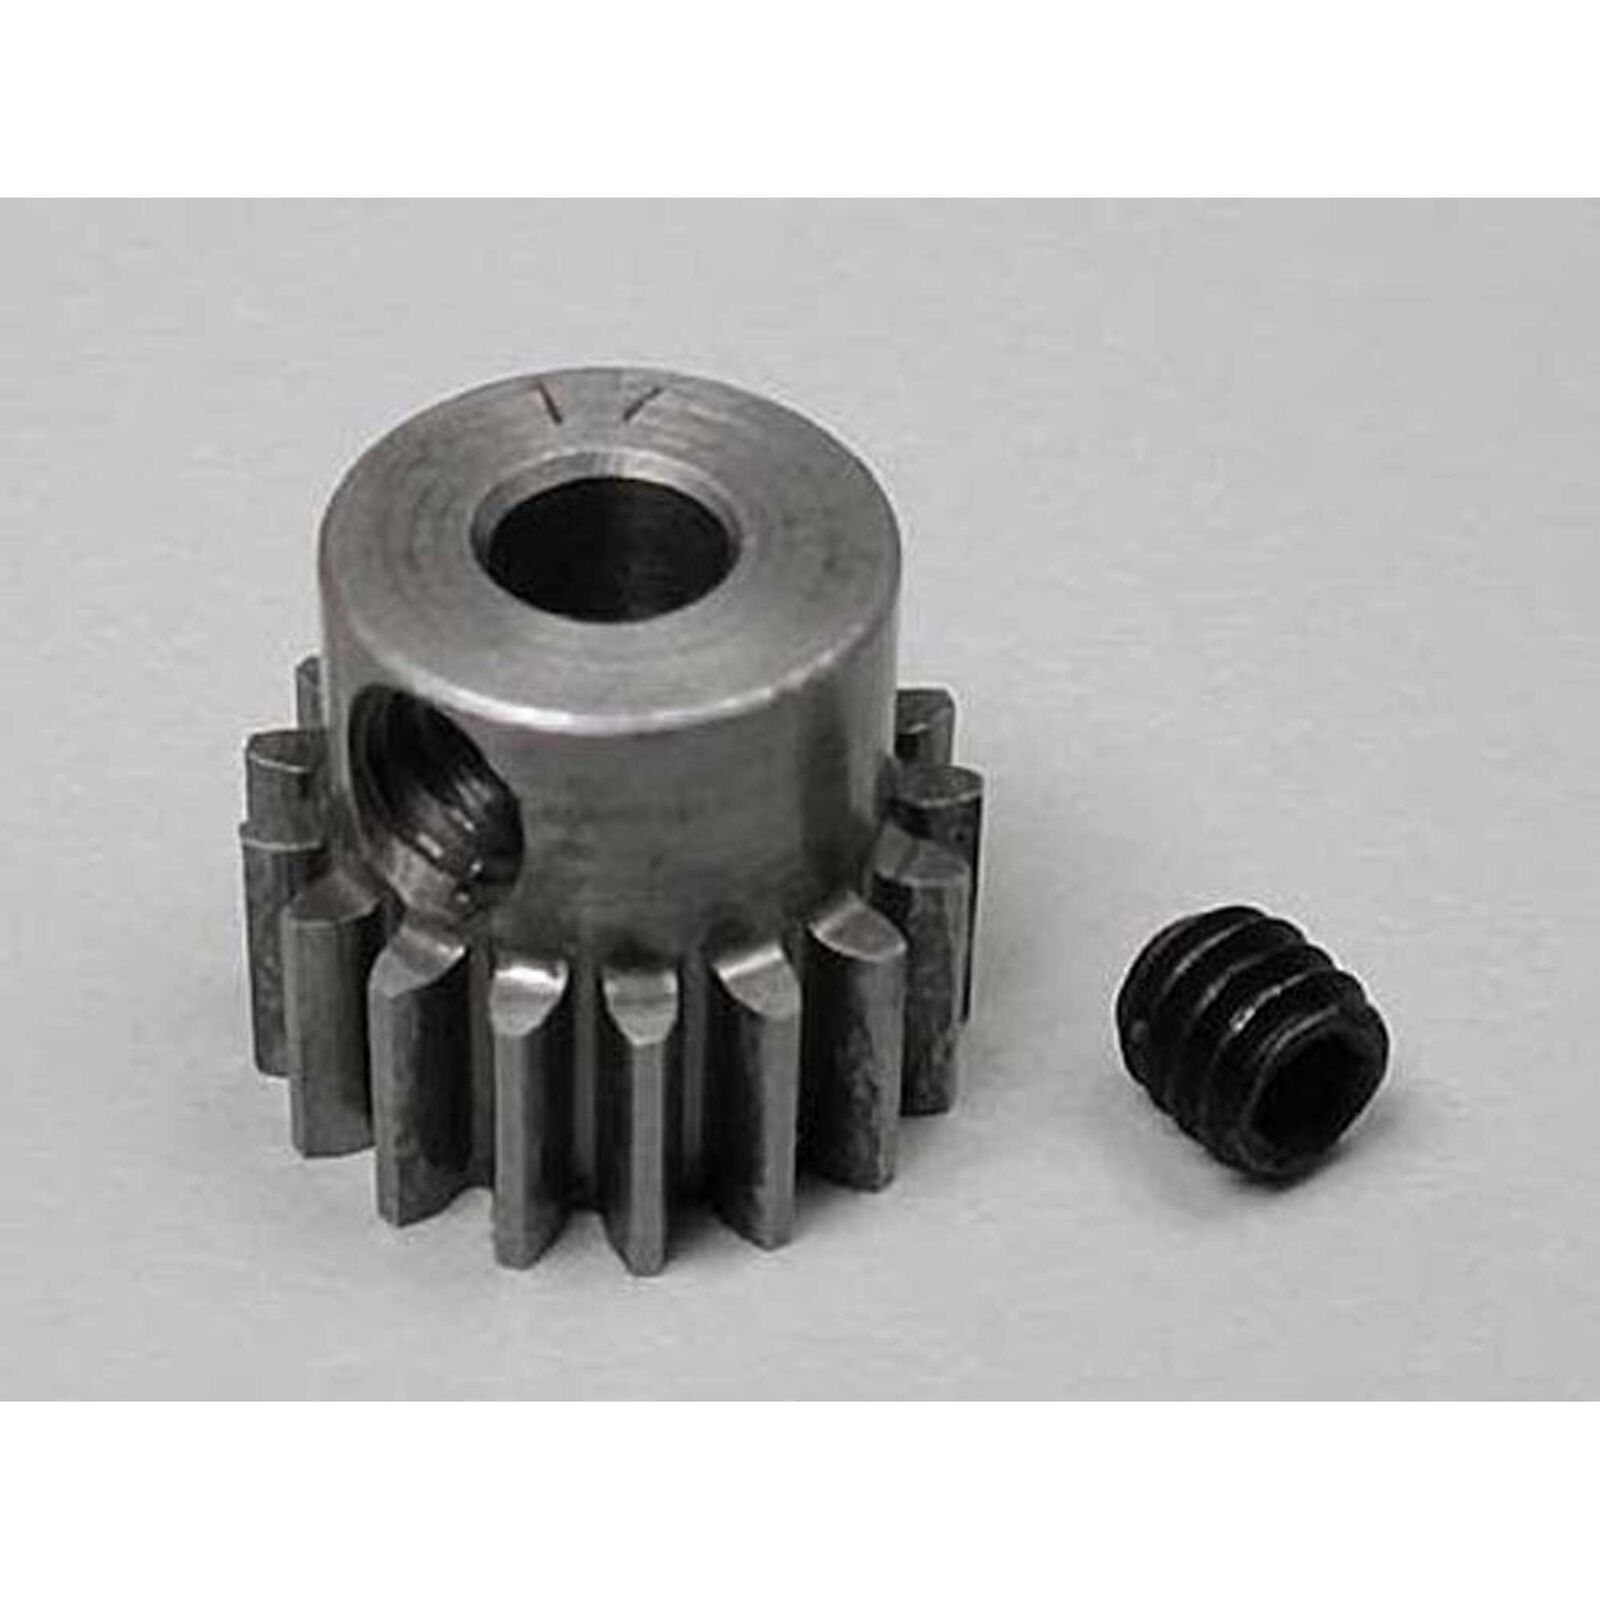 48P Absolute Pinion, 17T